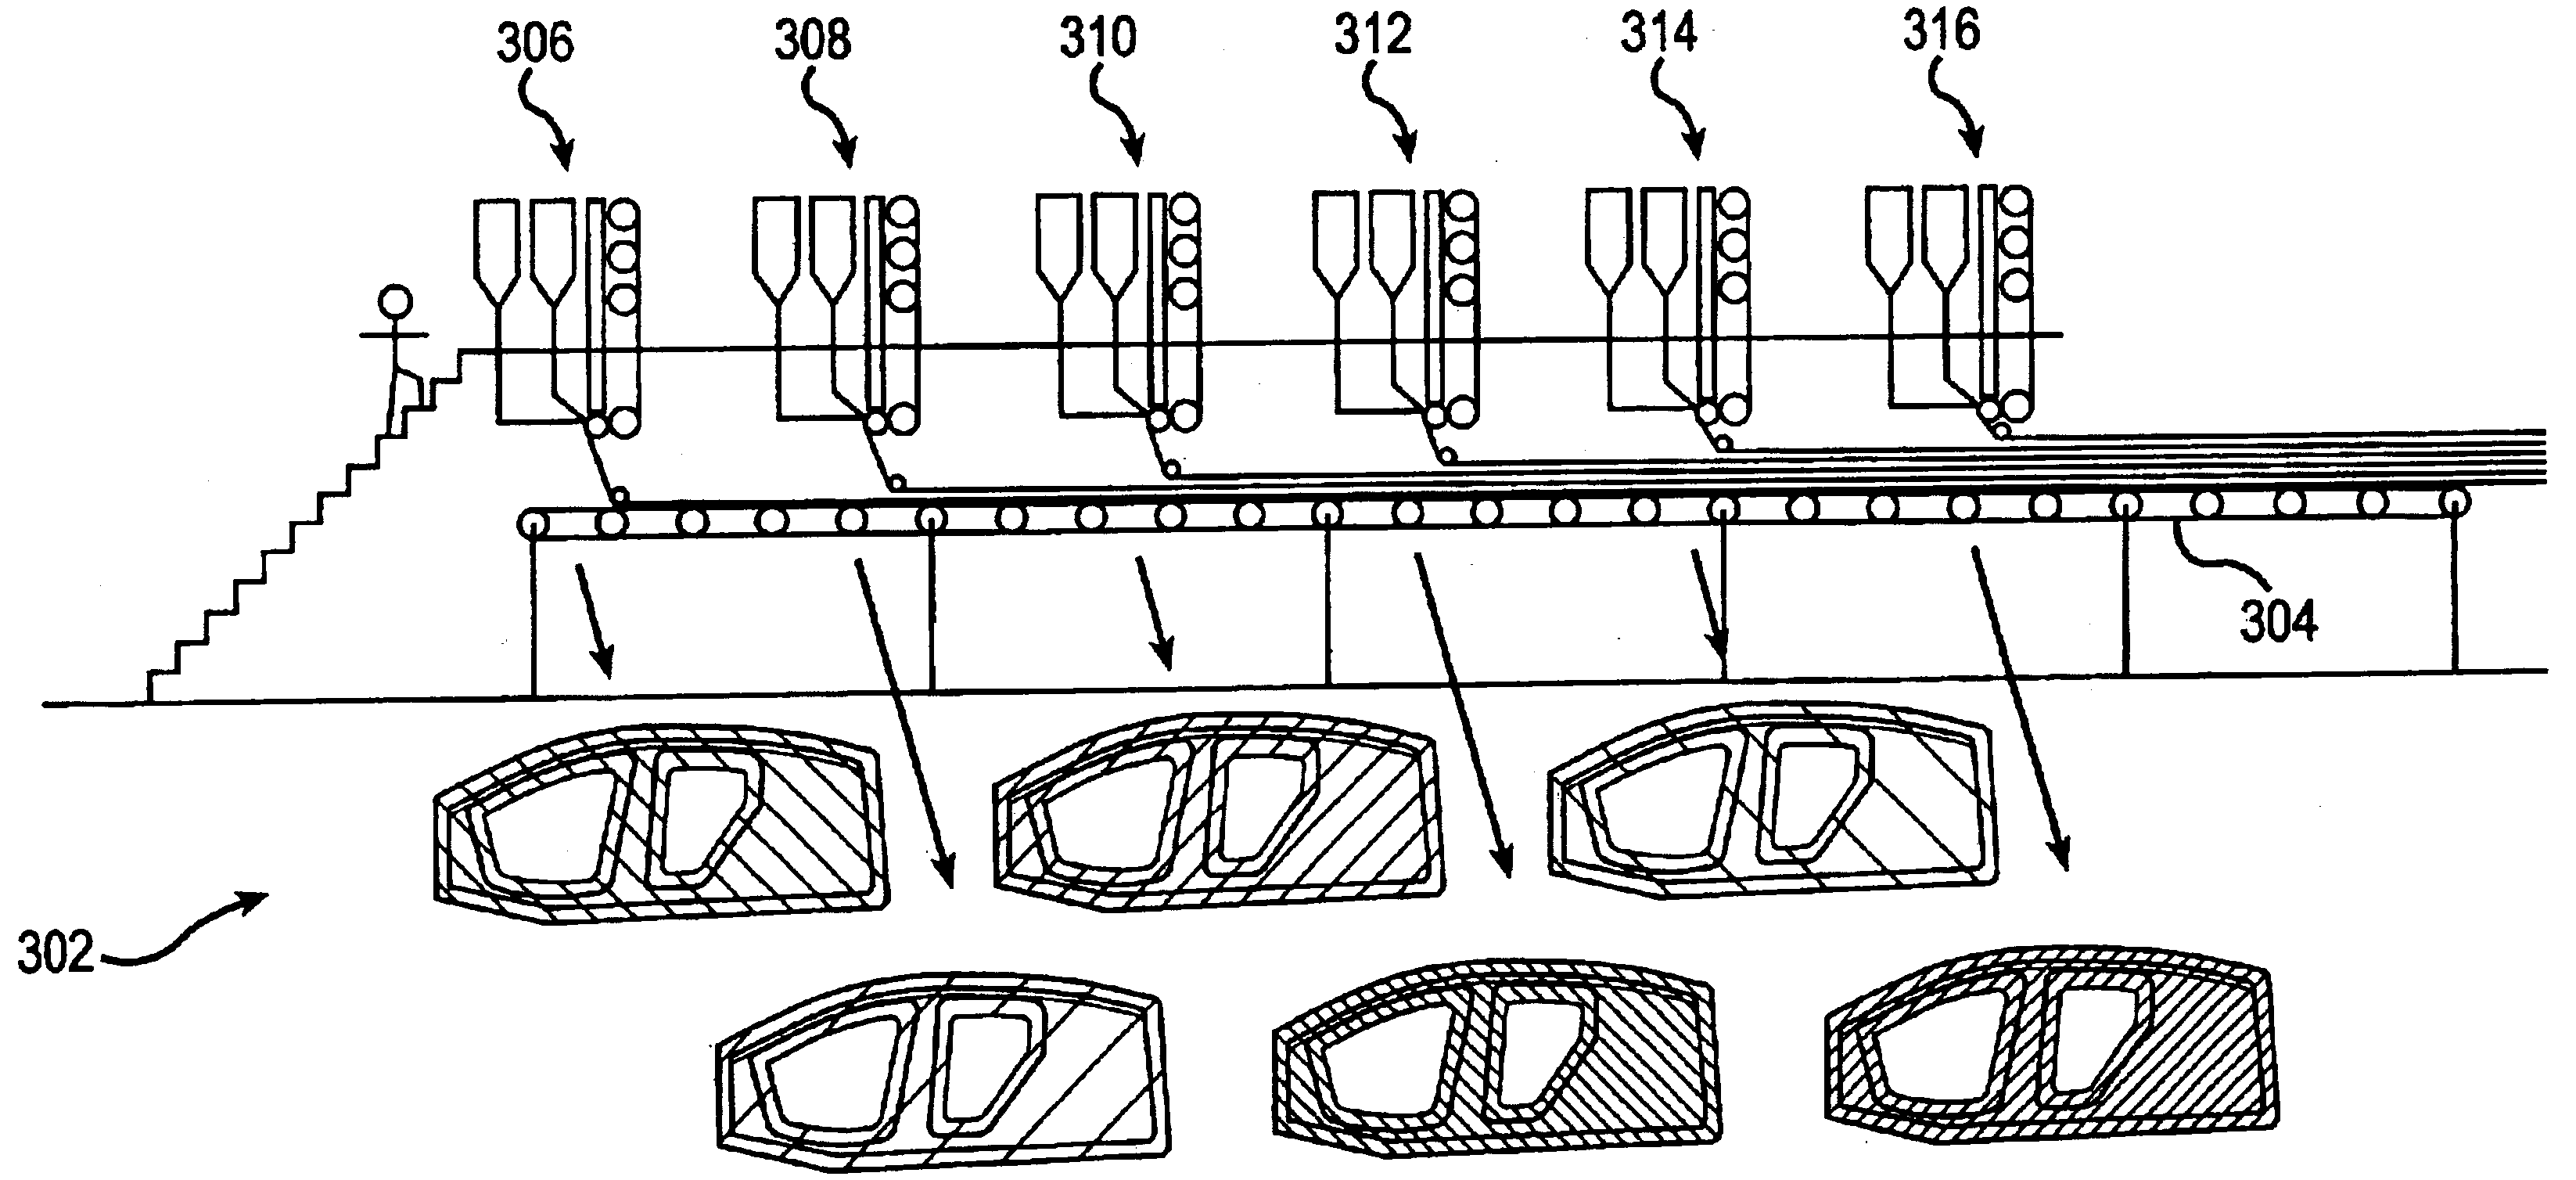 Process and equipment for manufacture of advanced composite structures